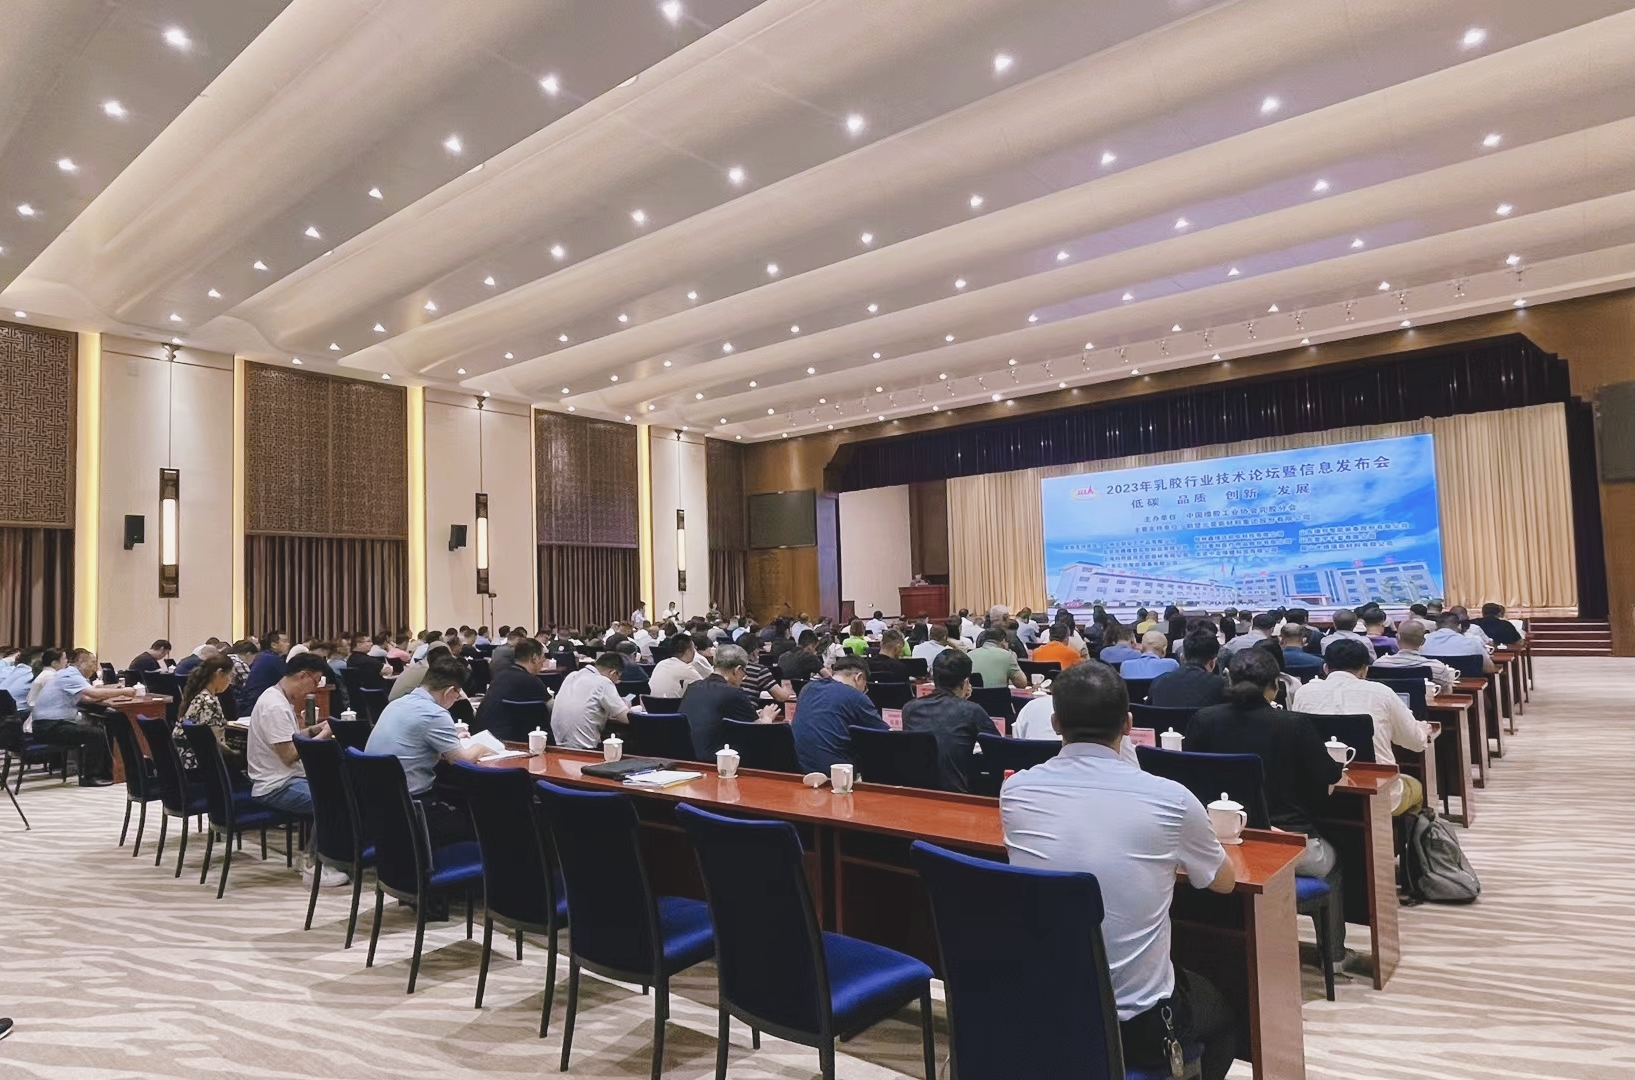 UHOO successfully co-organized the 2023 latex industry technology Forum and information conference